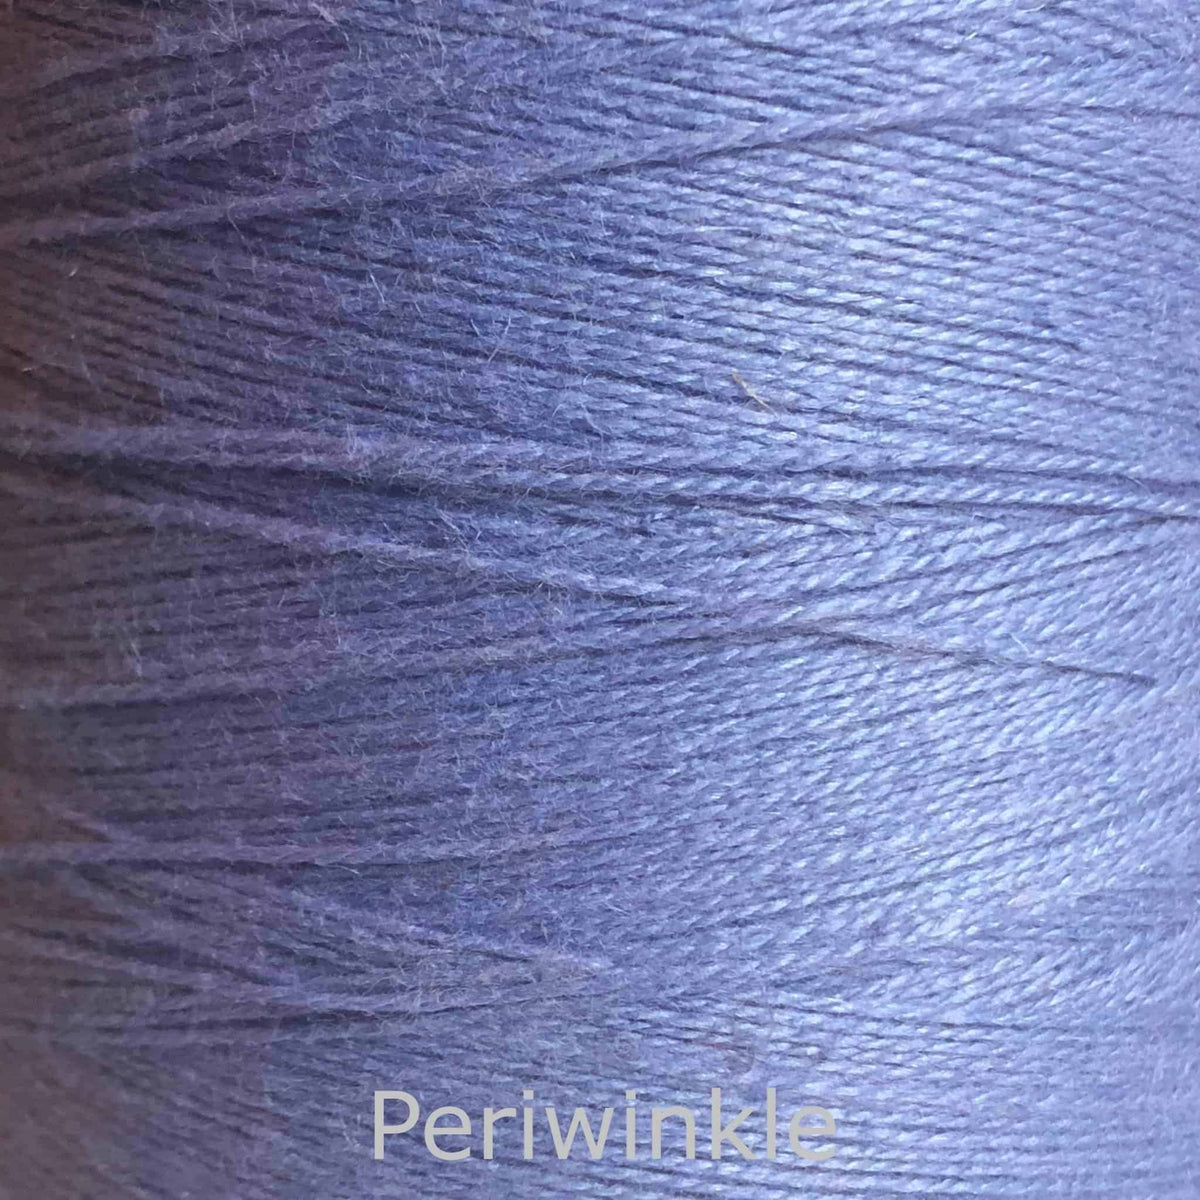 2,5 kgs soft yarn natural colour Nm 14/2 100% cotton knitting Crochet on  the cone